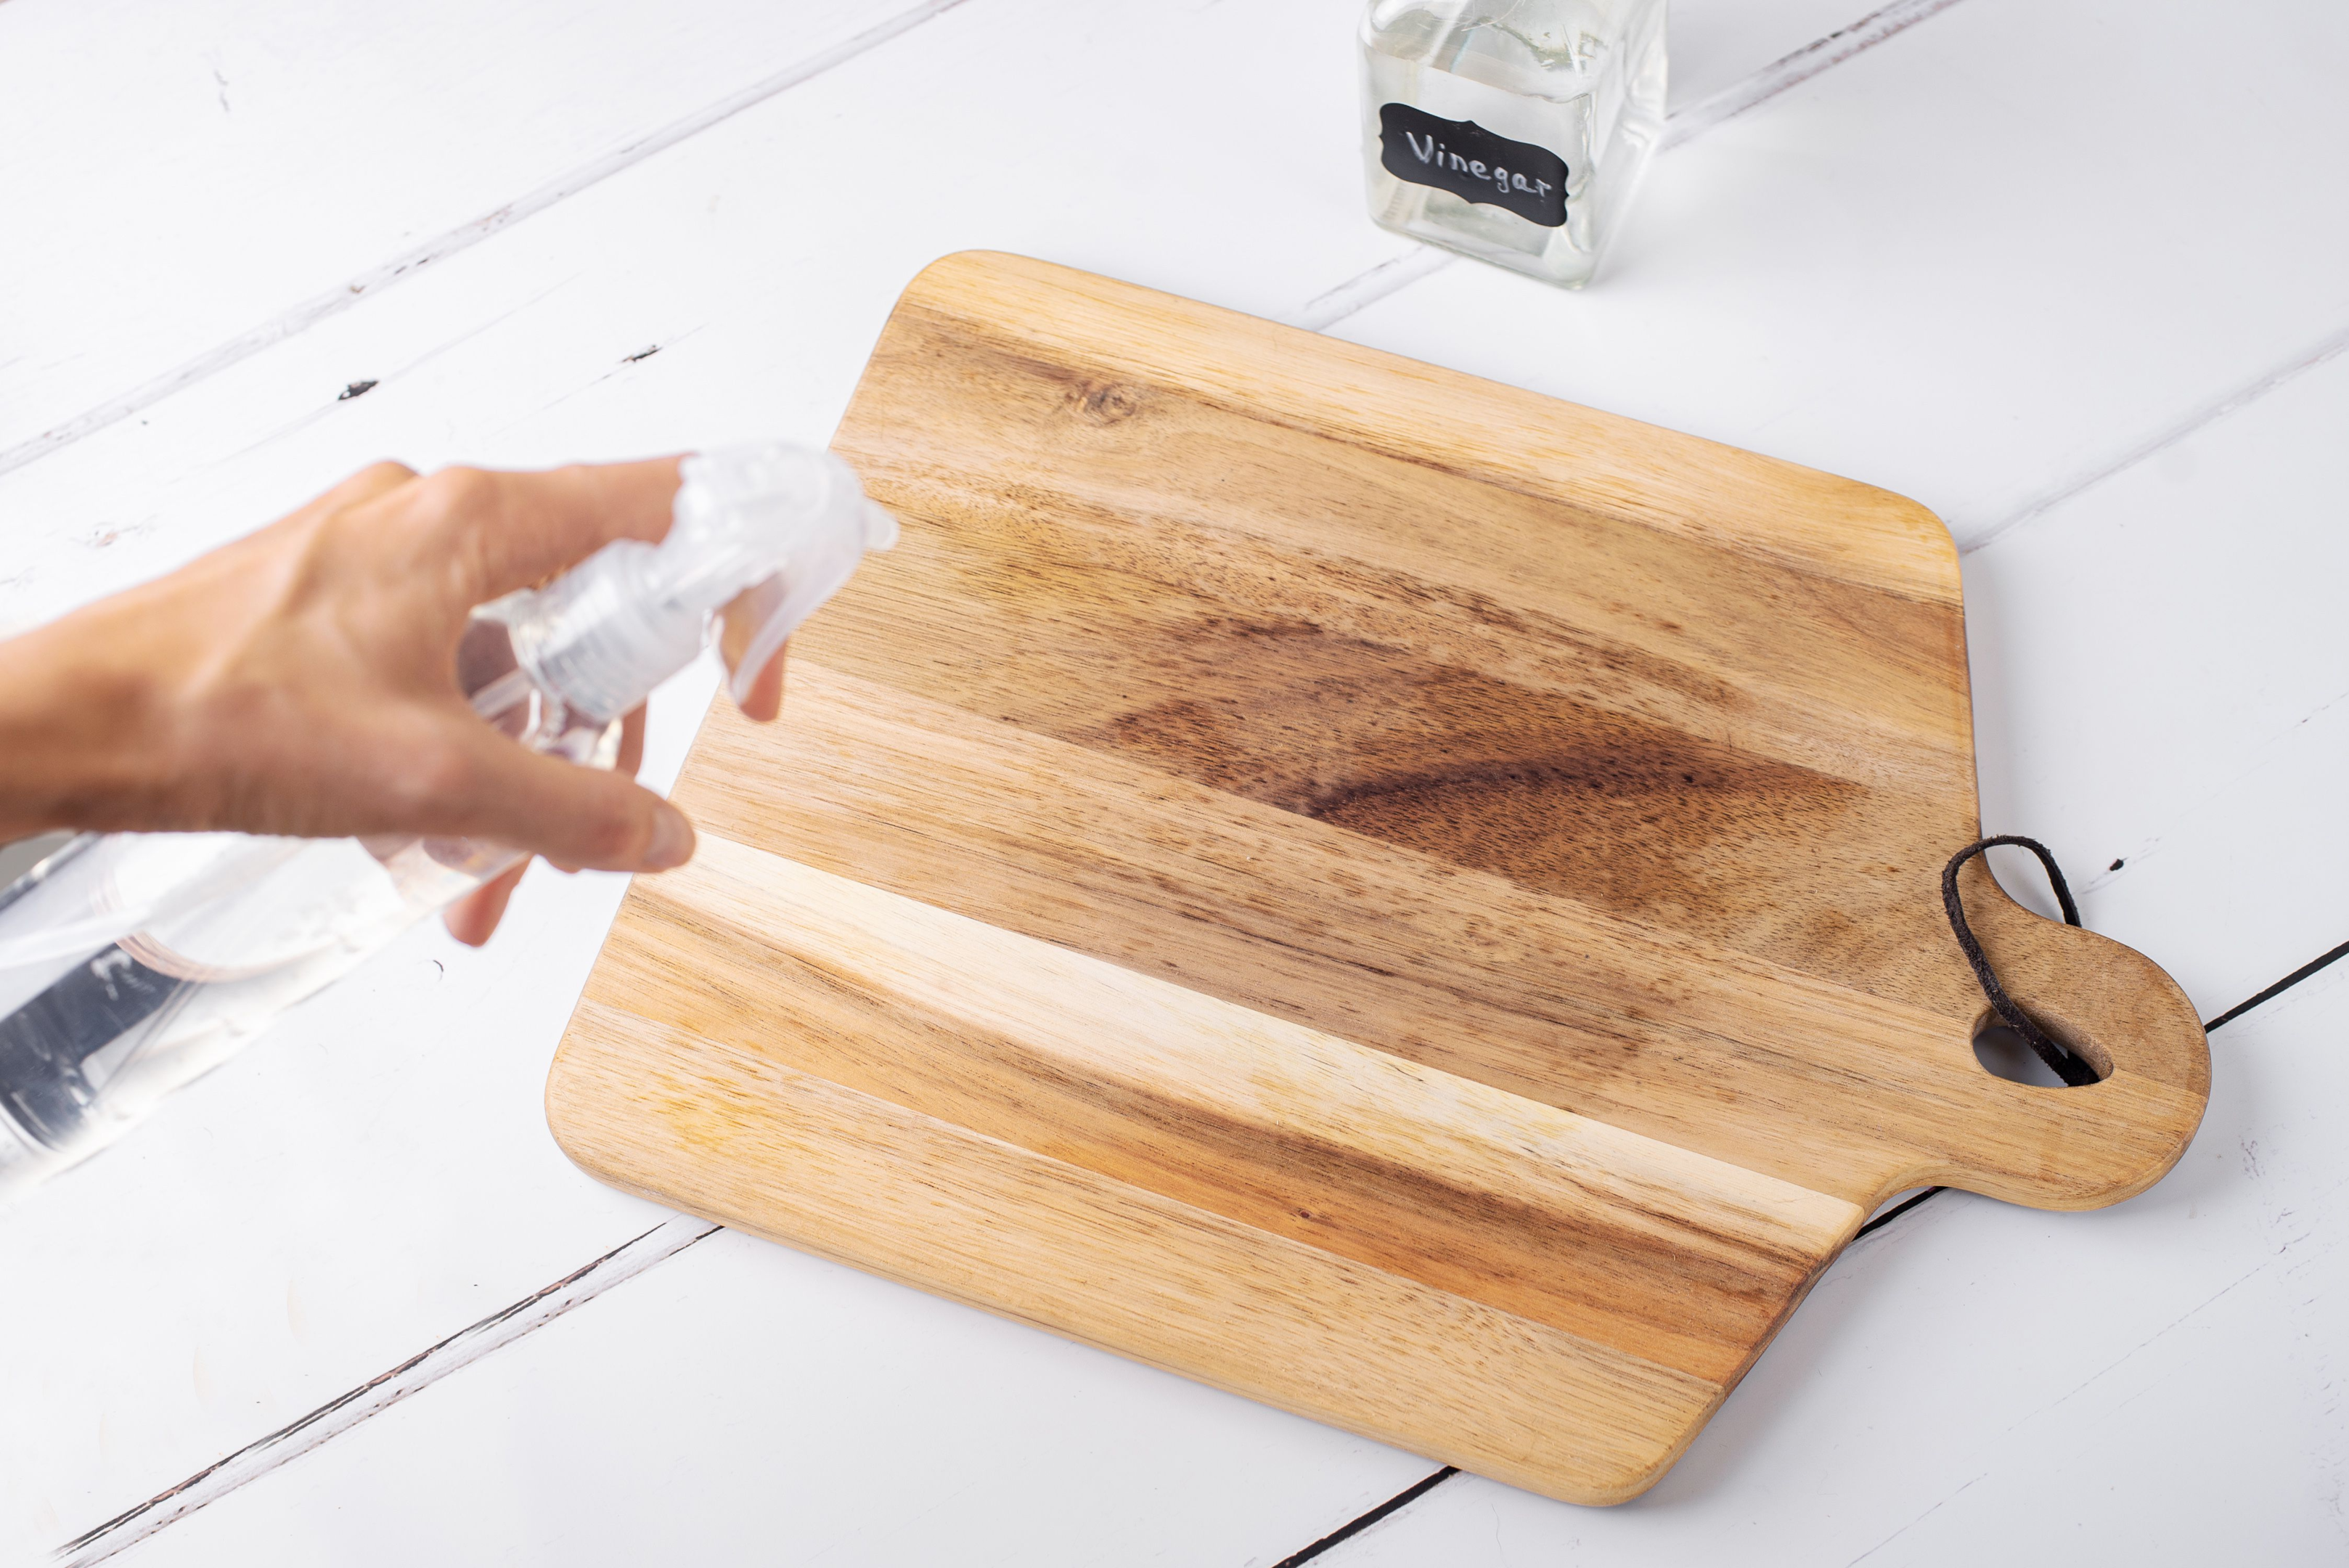 How to Clean a Cutting Board - Wood, Plastic & More